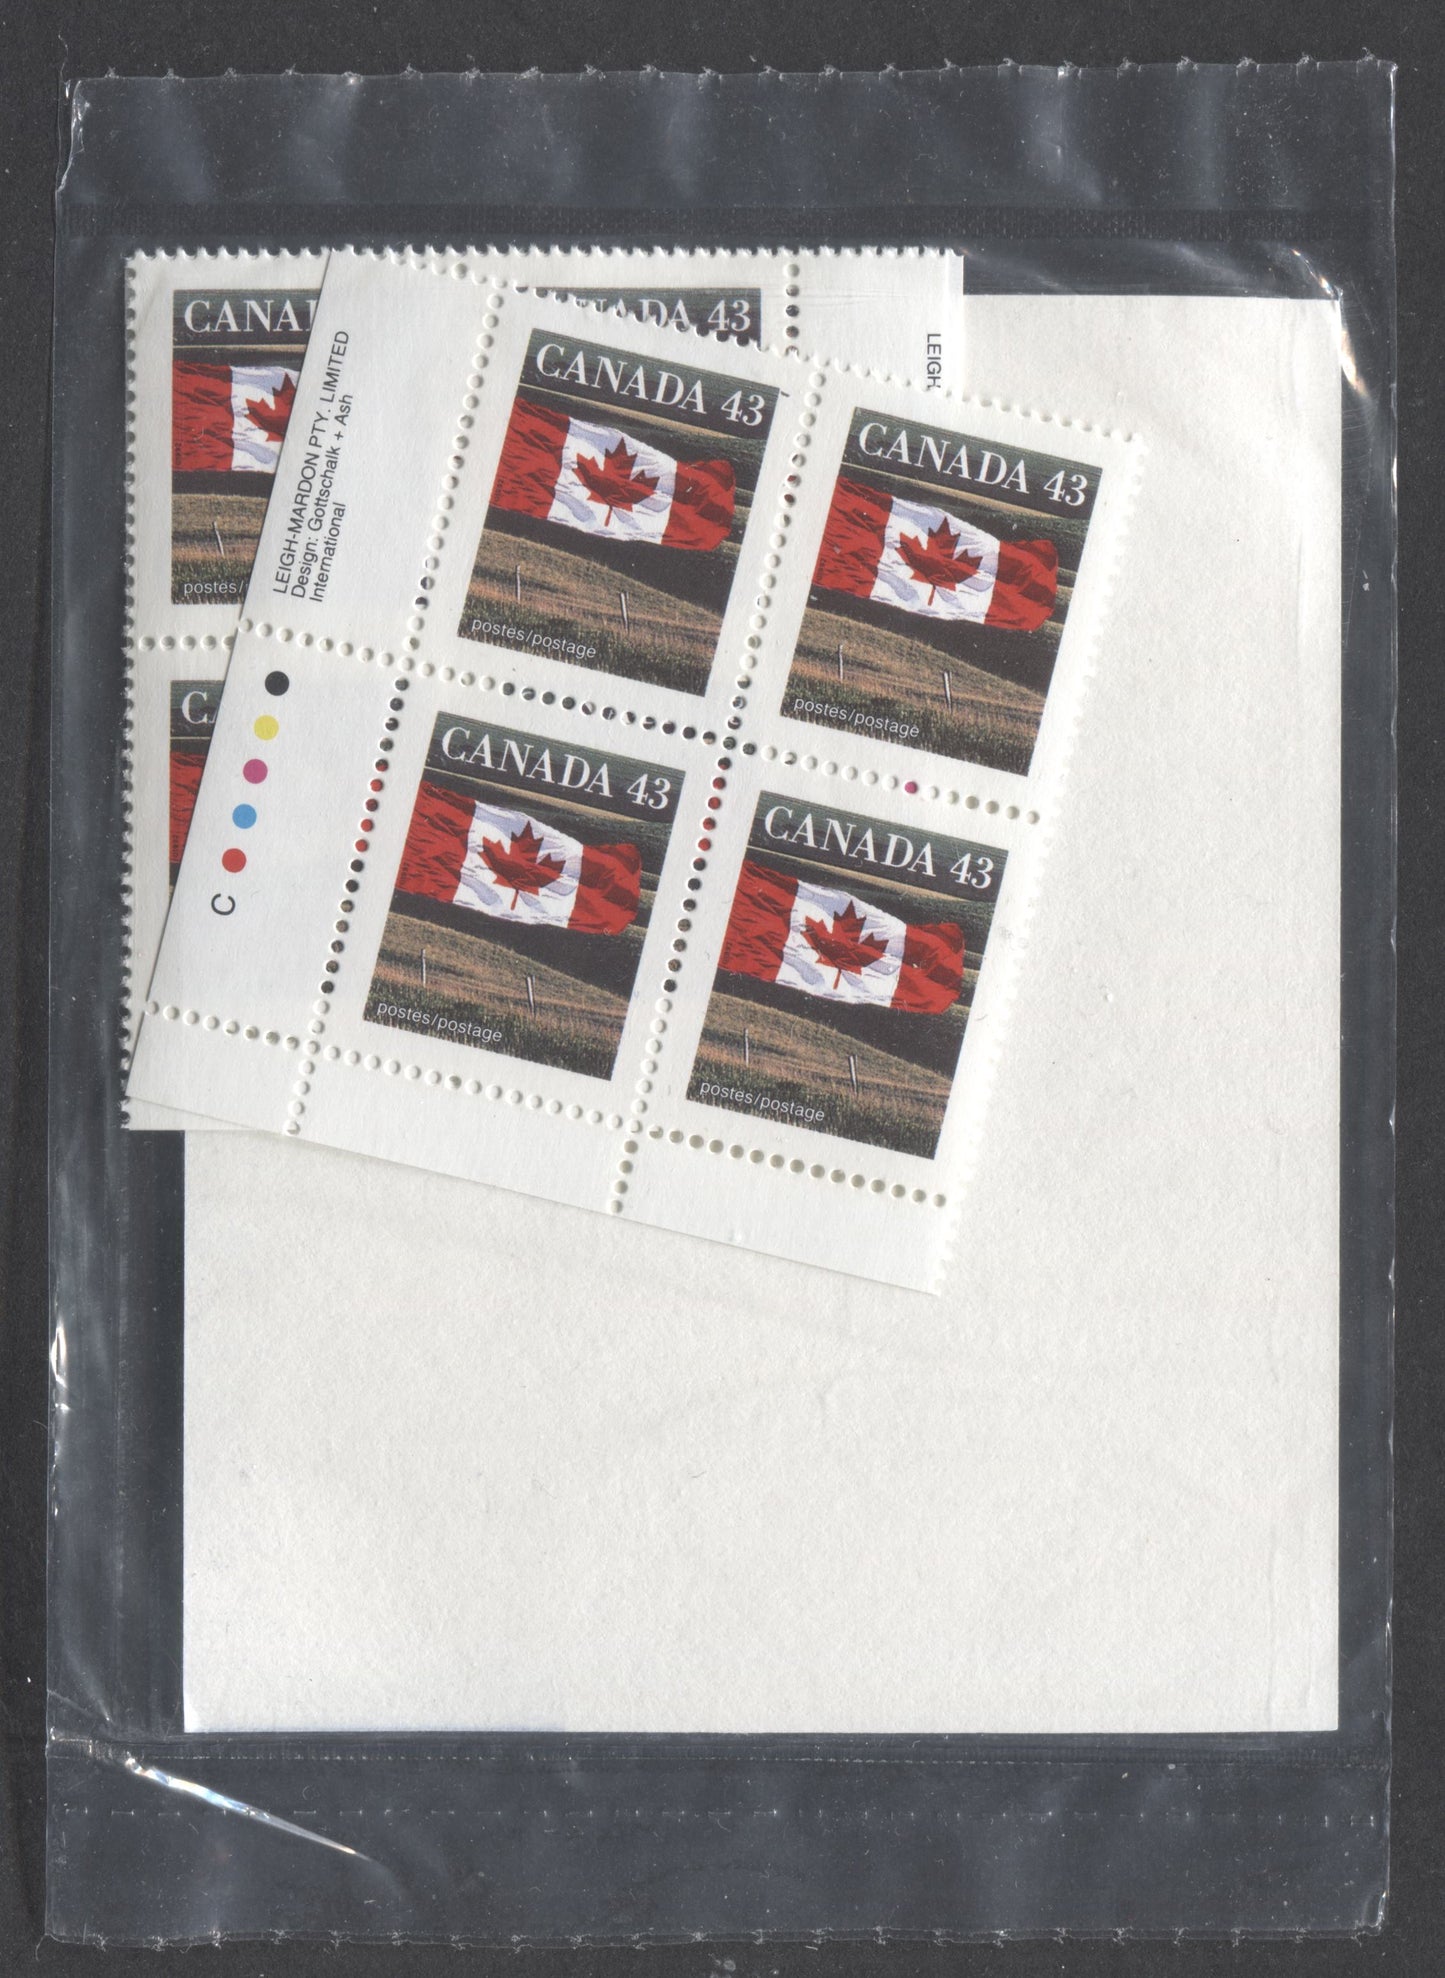 Lot 33 Canada #1359c 43c Multicoloured 1992 Domestic First-Class Rate Issue, Canada Post Sealed Pack of Inscription Blocks, Leigh Mardon Printing On DF CPP Paper, With HB Type 6A Insert Card, VFNH, Unitrade Cat. $30